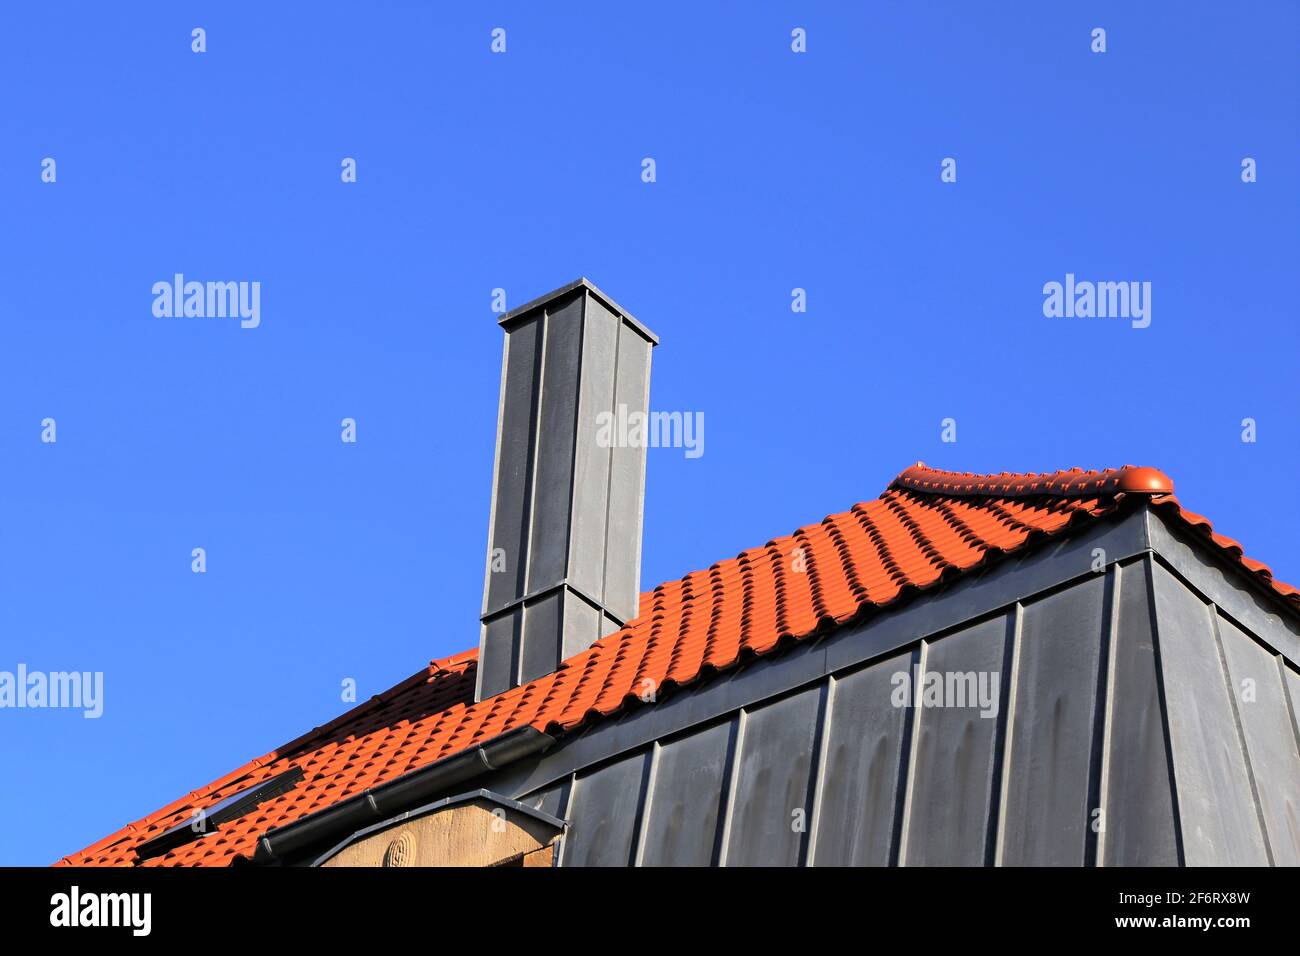 Chimney with stainless steel cladding on a newly covered roof. Stock Photo